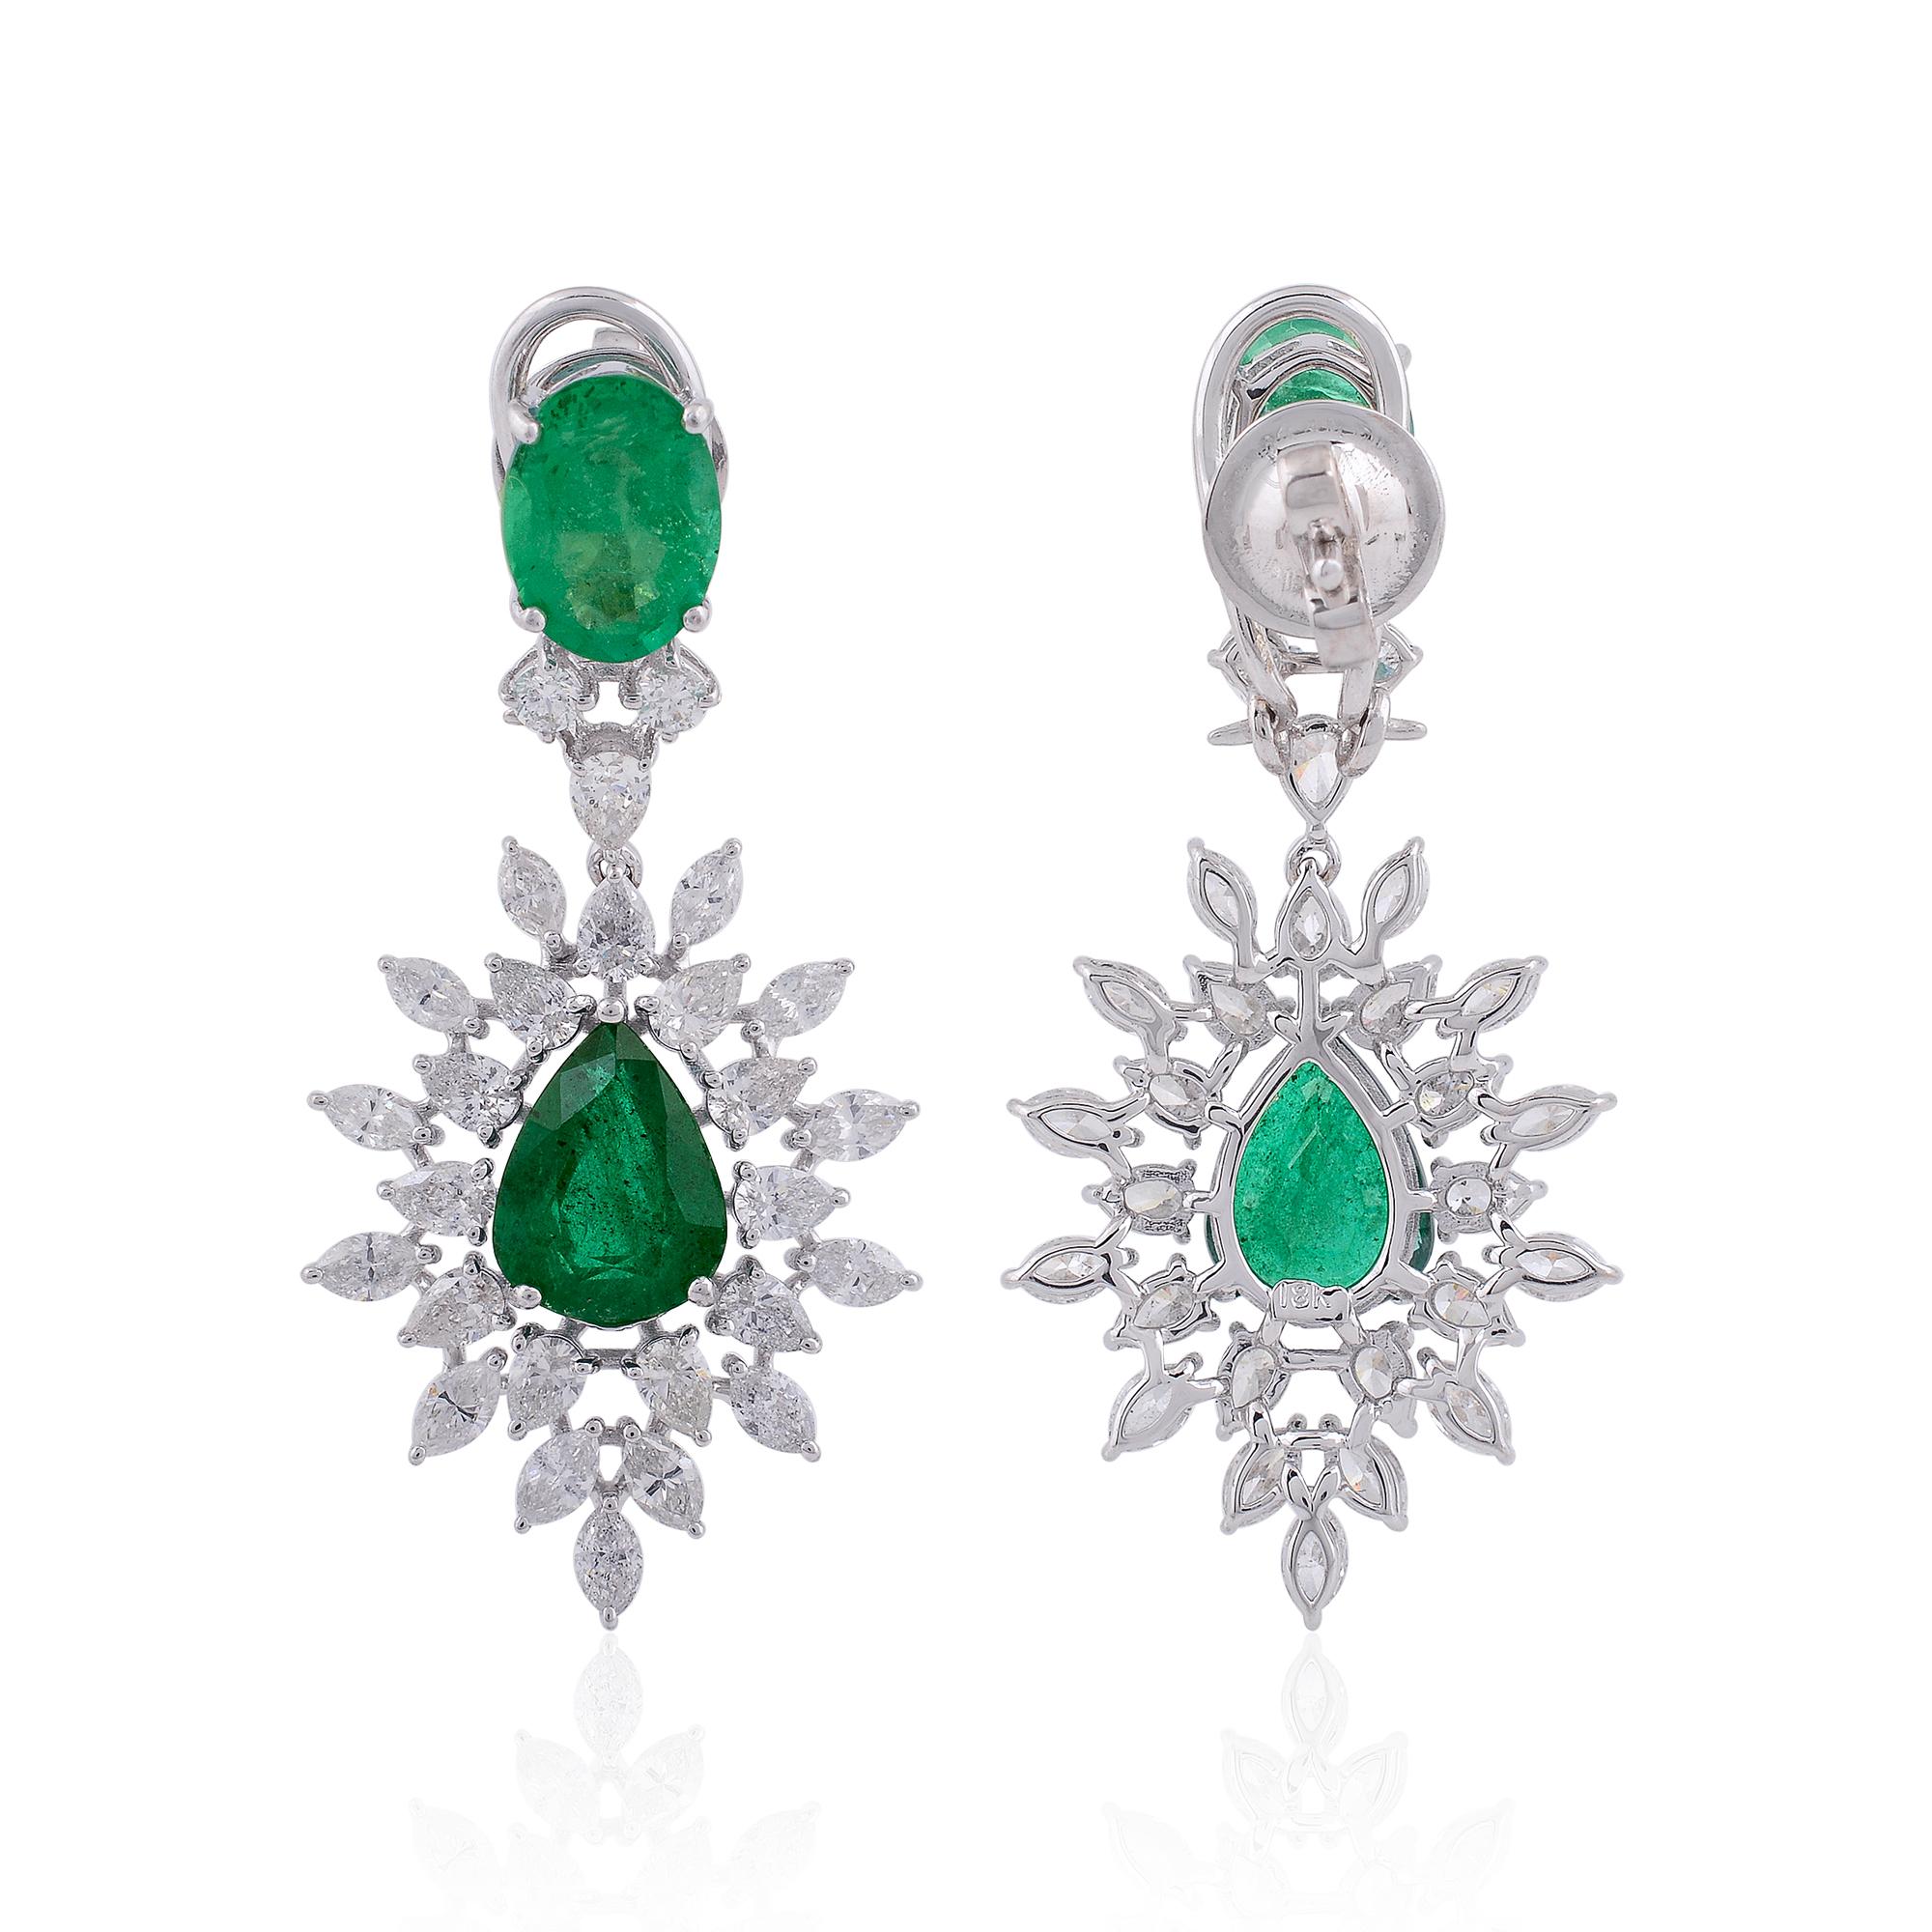 Item Code :- SEE-1279
Gross Wt. :- 8.62 gm
18k White Gold Wt. :- 6.75 gm
Natural Diamond Wt. :- 3.45 Ct. ( AVERAGE DIAMOND CLARITY SI1-SI2 & COLOR H-I )
Zambian Emerald Wt. :- 5.88 Ct.

✦ Sizing
.....................
We can adjust most items to fit